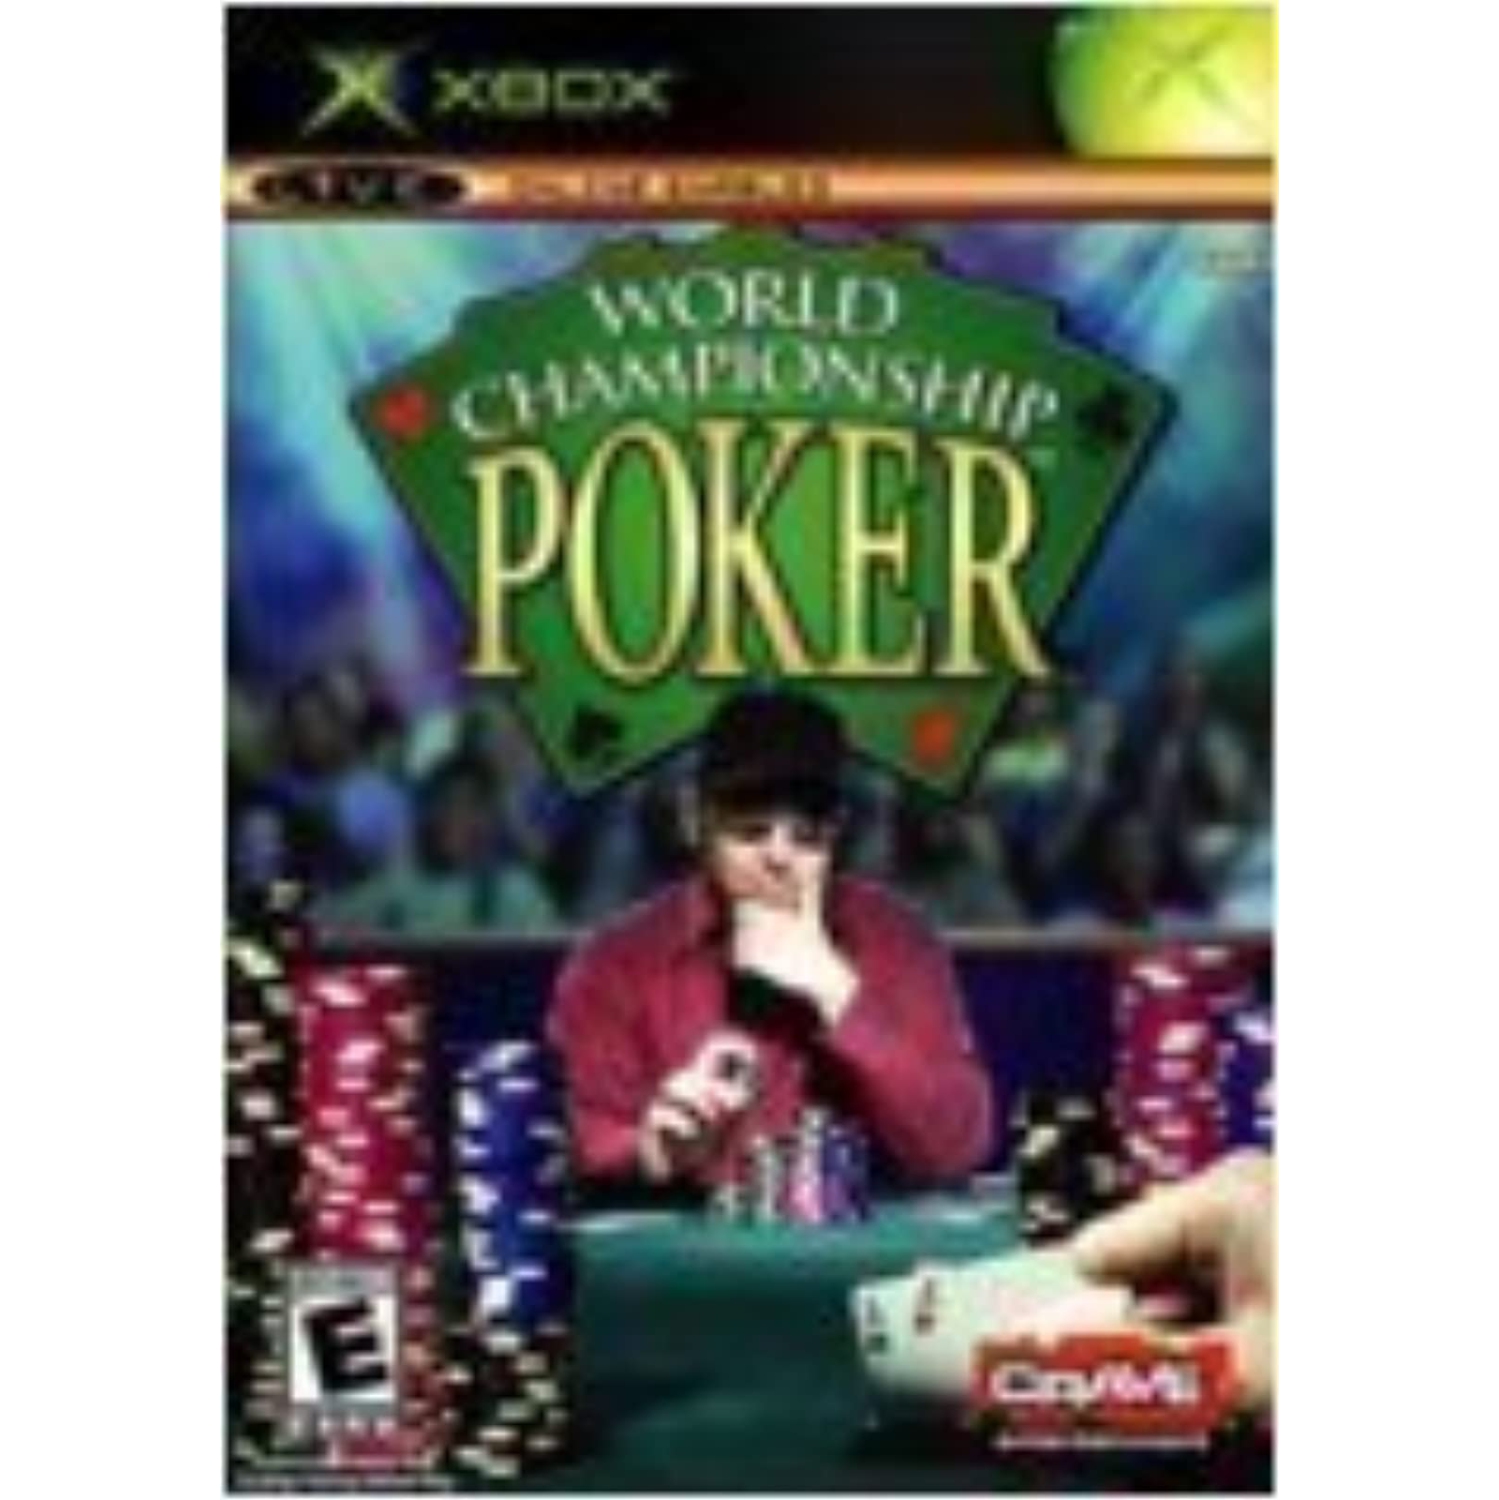 Previously Played - World Championship Poker Xbox For Xbox Original With Xbox Live Online Enabled